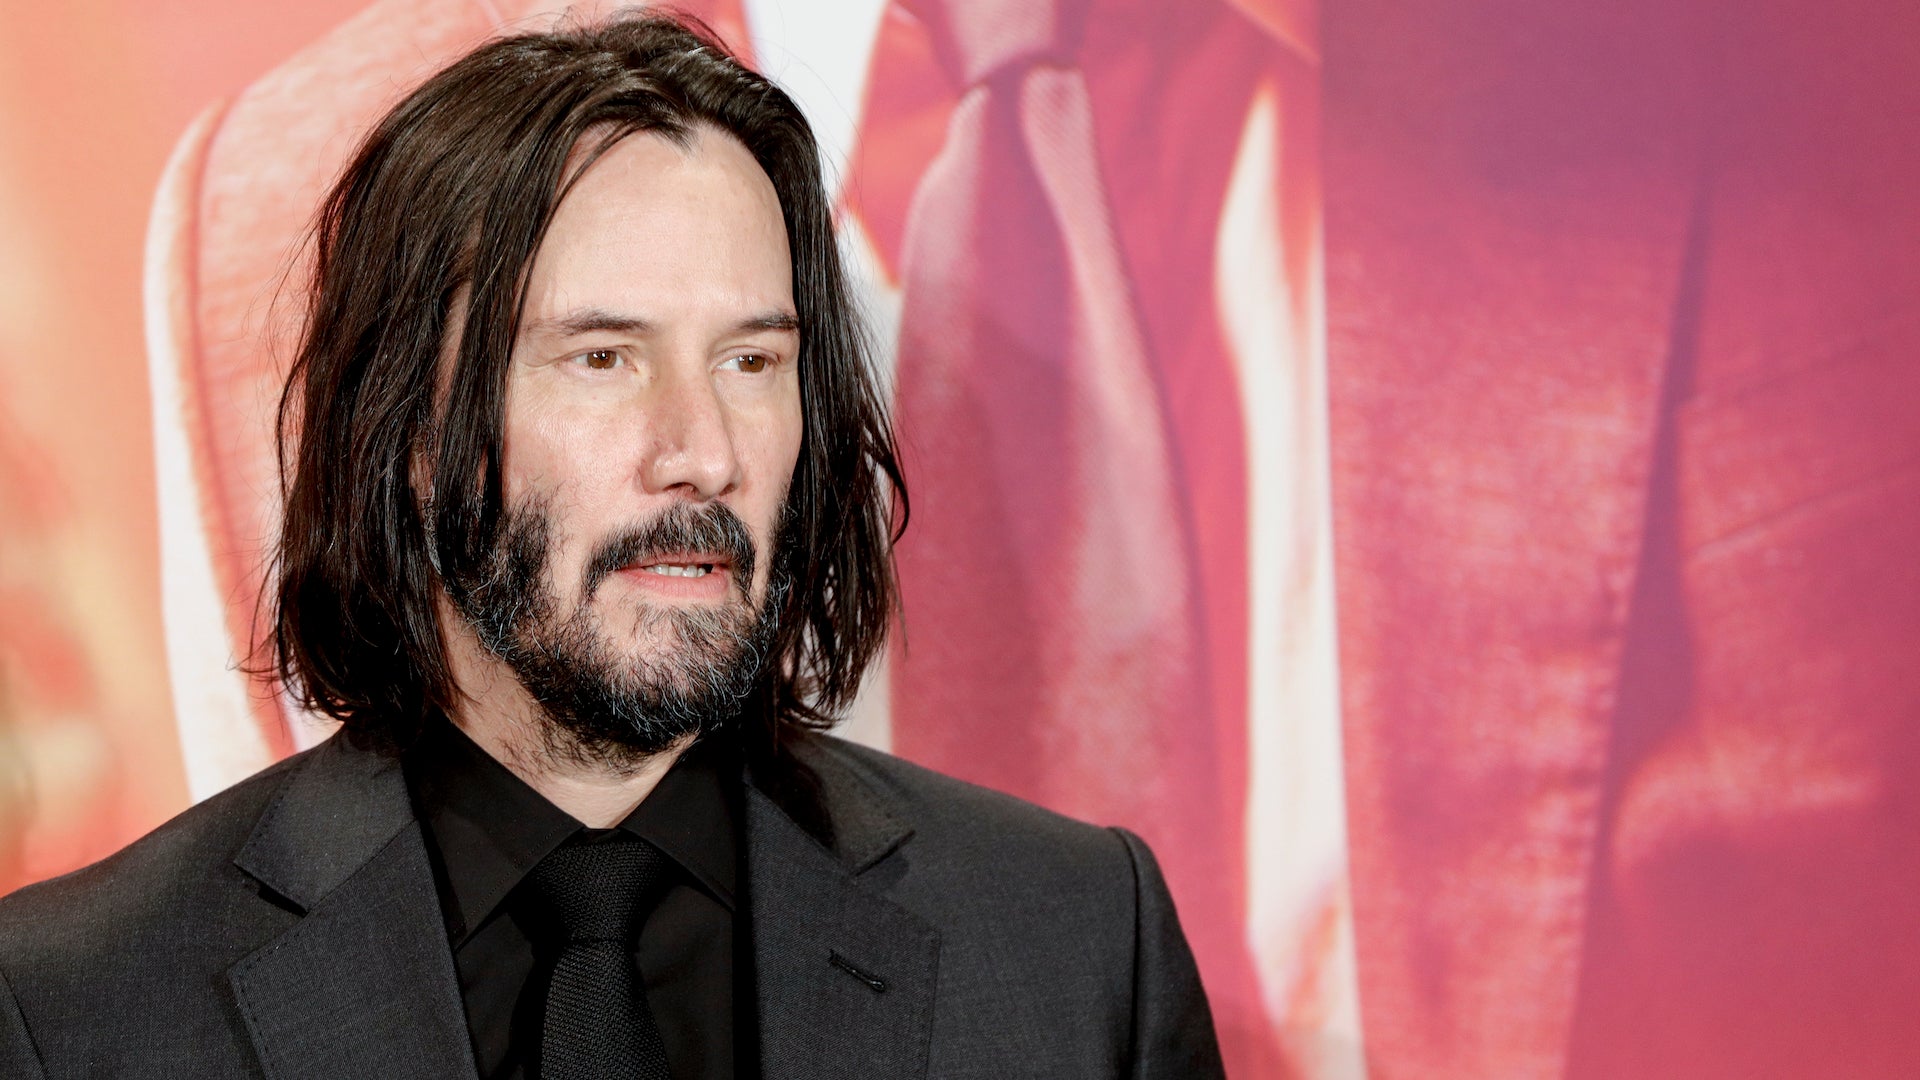 Keanu Reeves Is A Proud Person Of Color, But Doesn't Want To Be 'A Spokesperson'